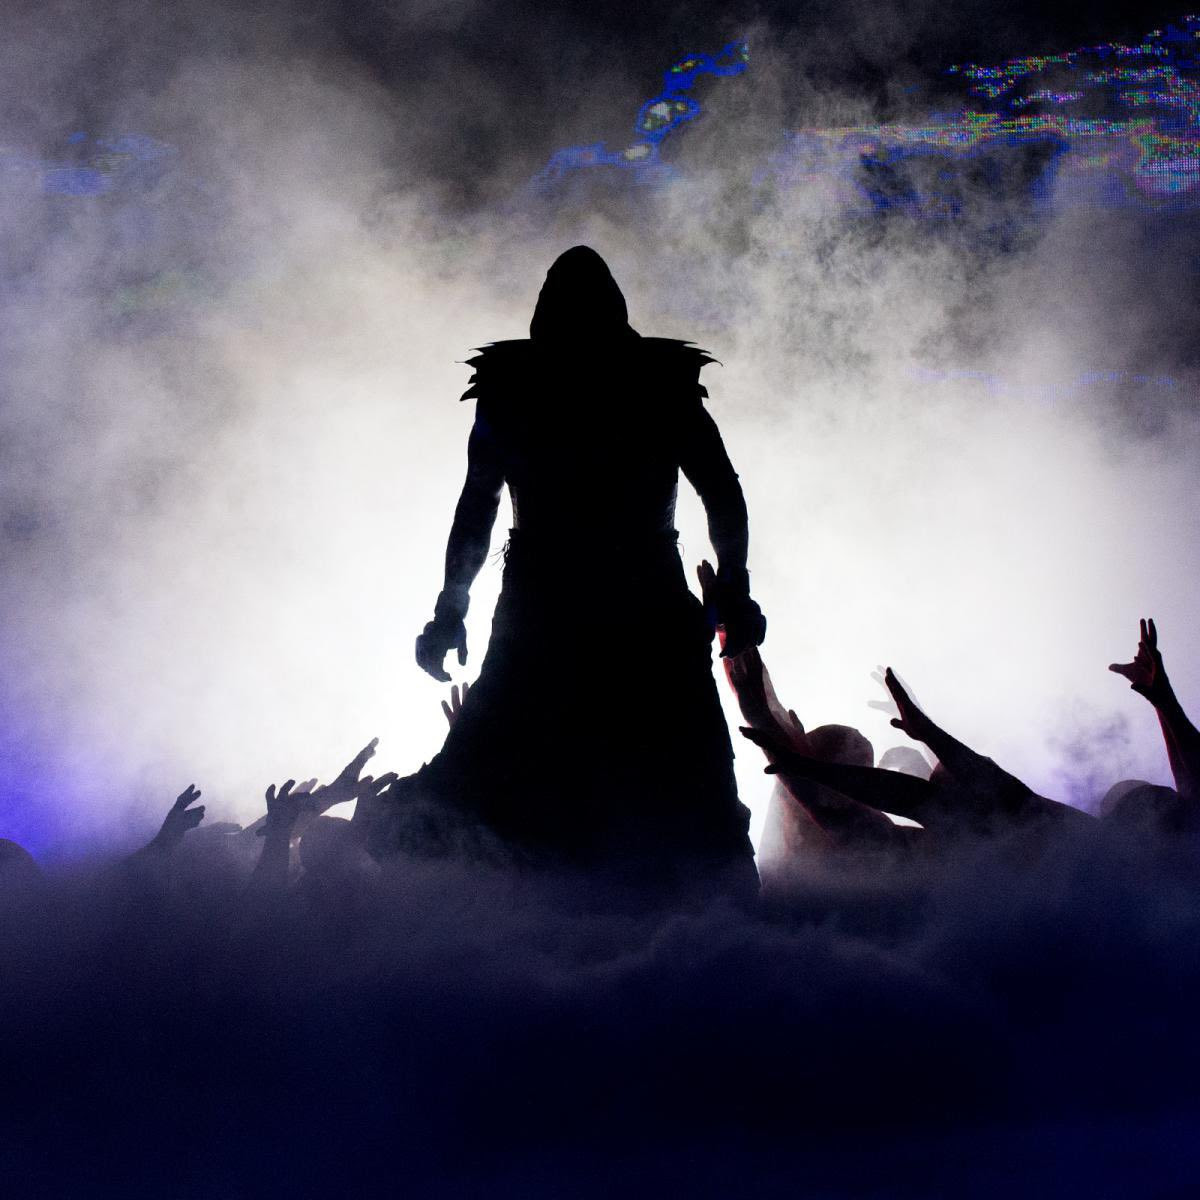 Wrestling legend, The Undertaker officially Confirms WWE Retirement after 30 year career (Photos/Video)